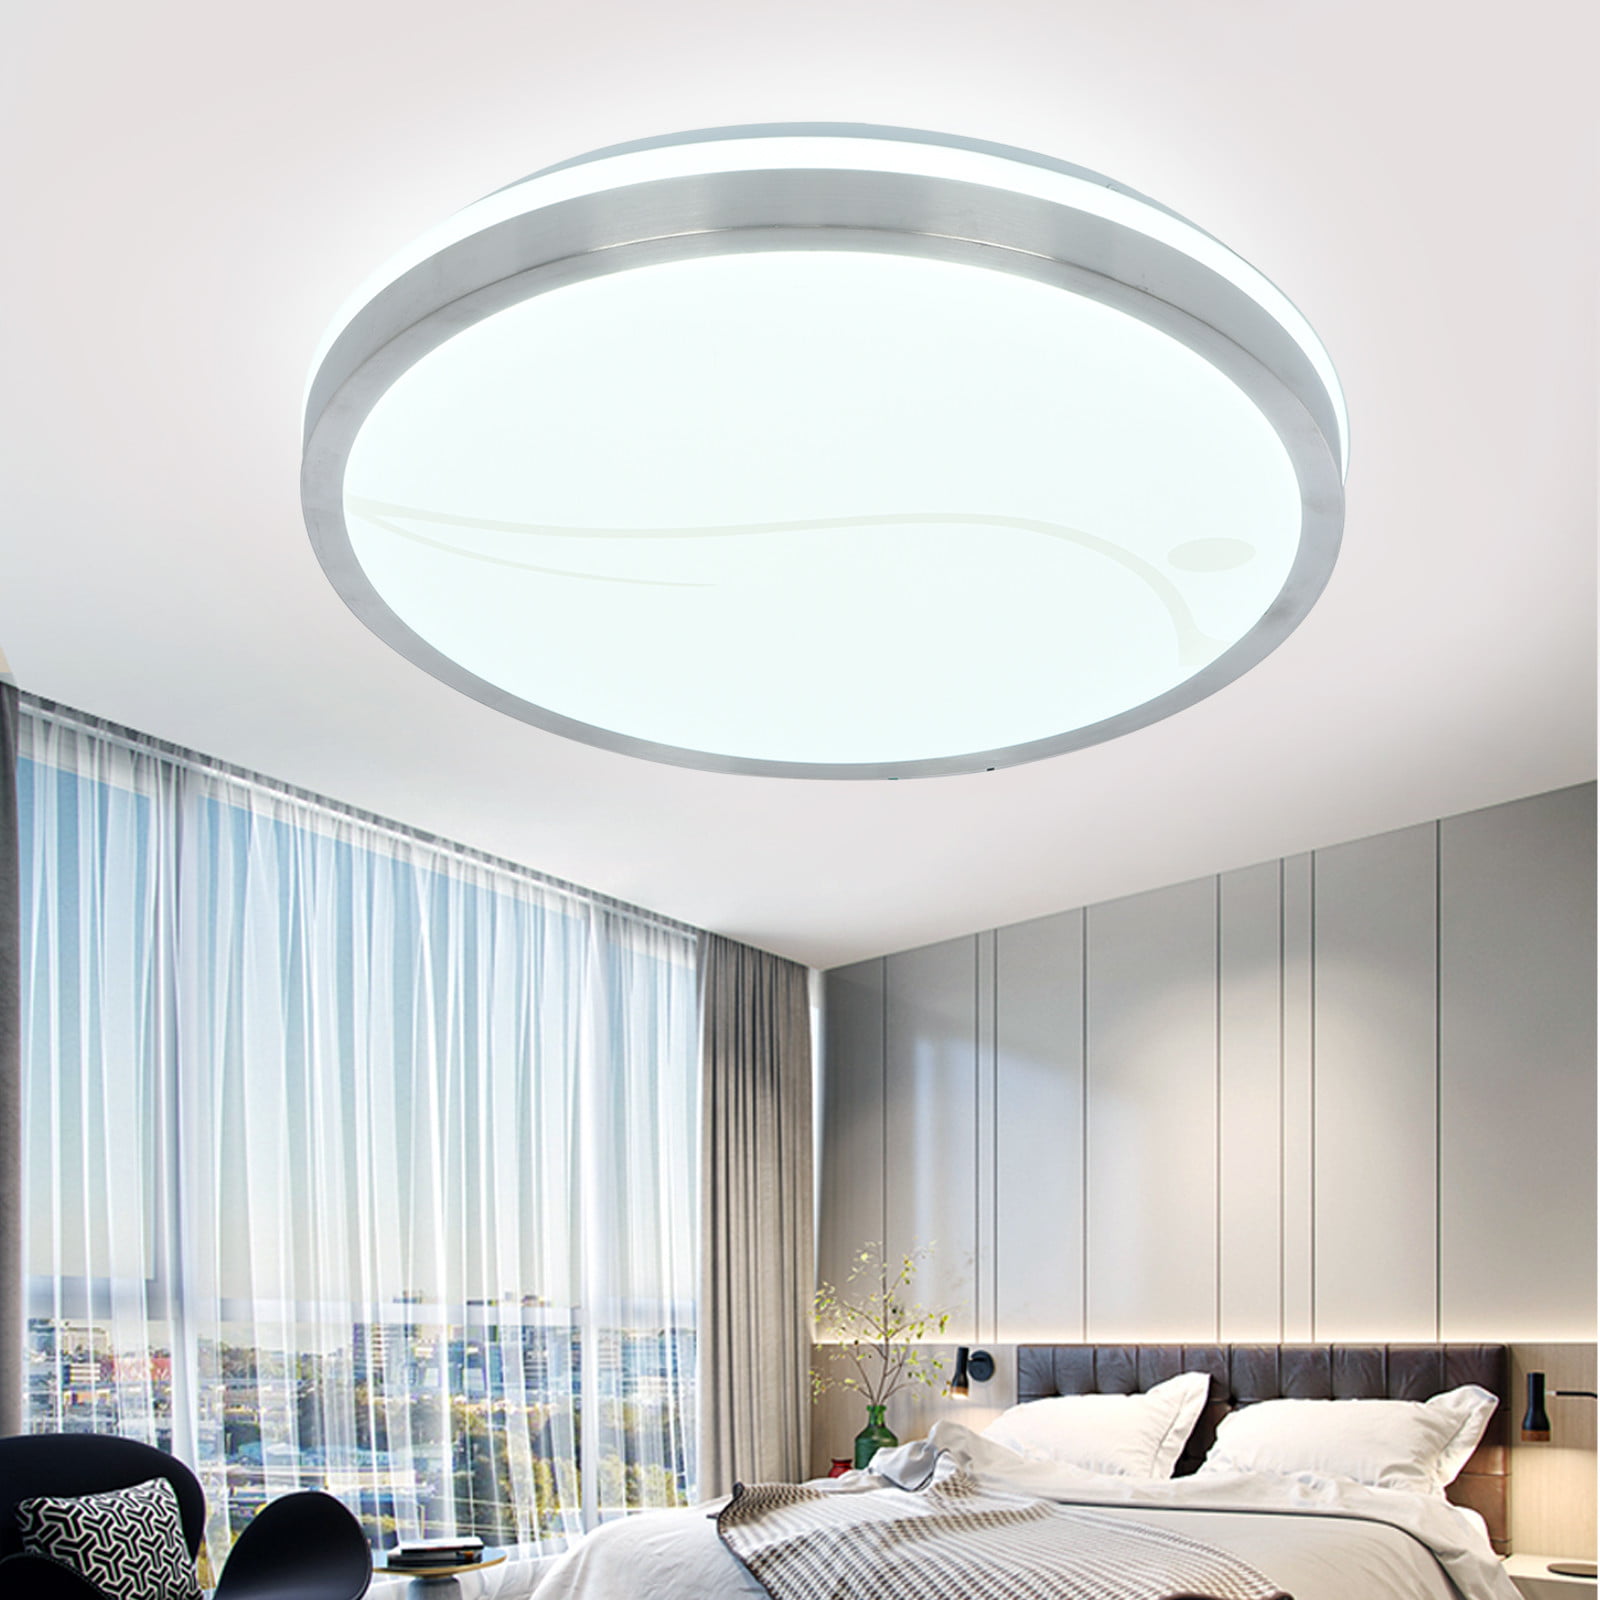 LED Ceiling Light Round Panel Down Lights Bathroom Kitchen Living Room Wall Lamp 